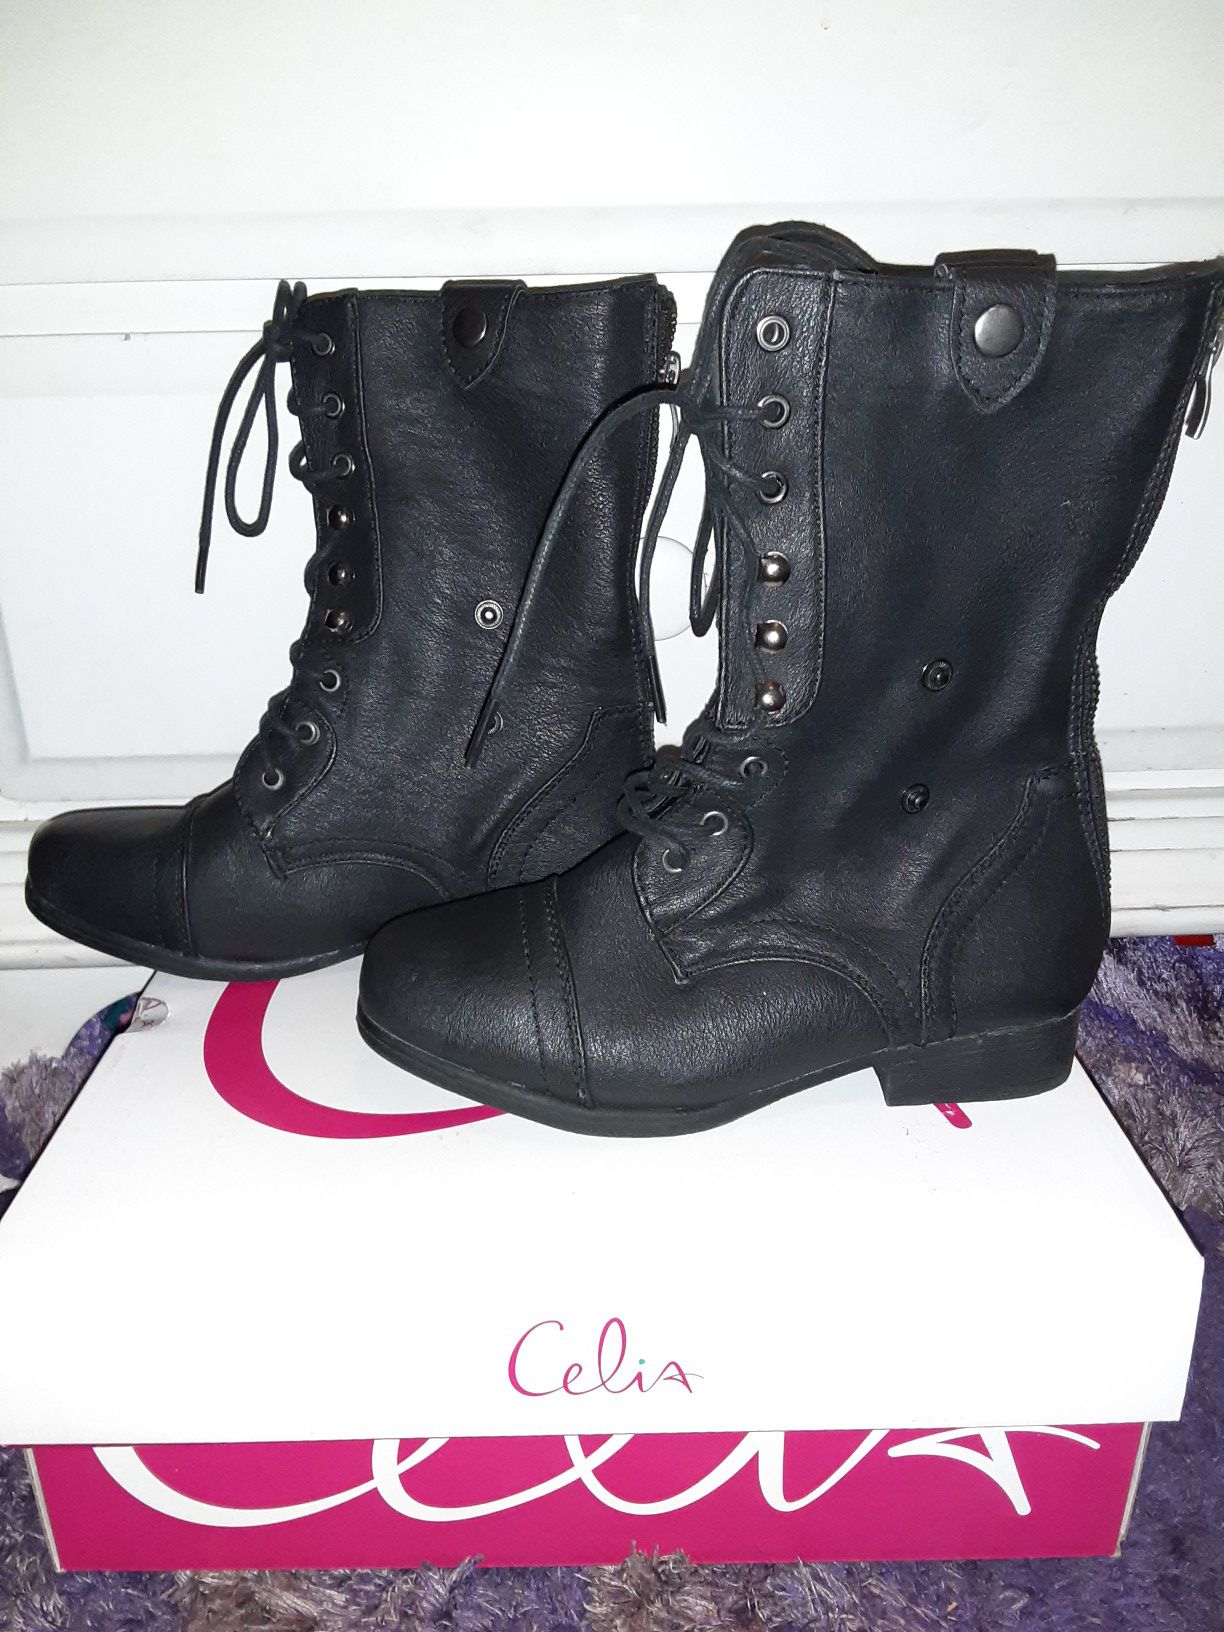 New boots for girls size 4